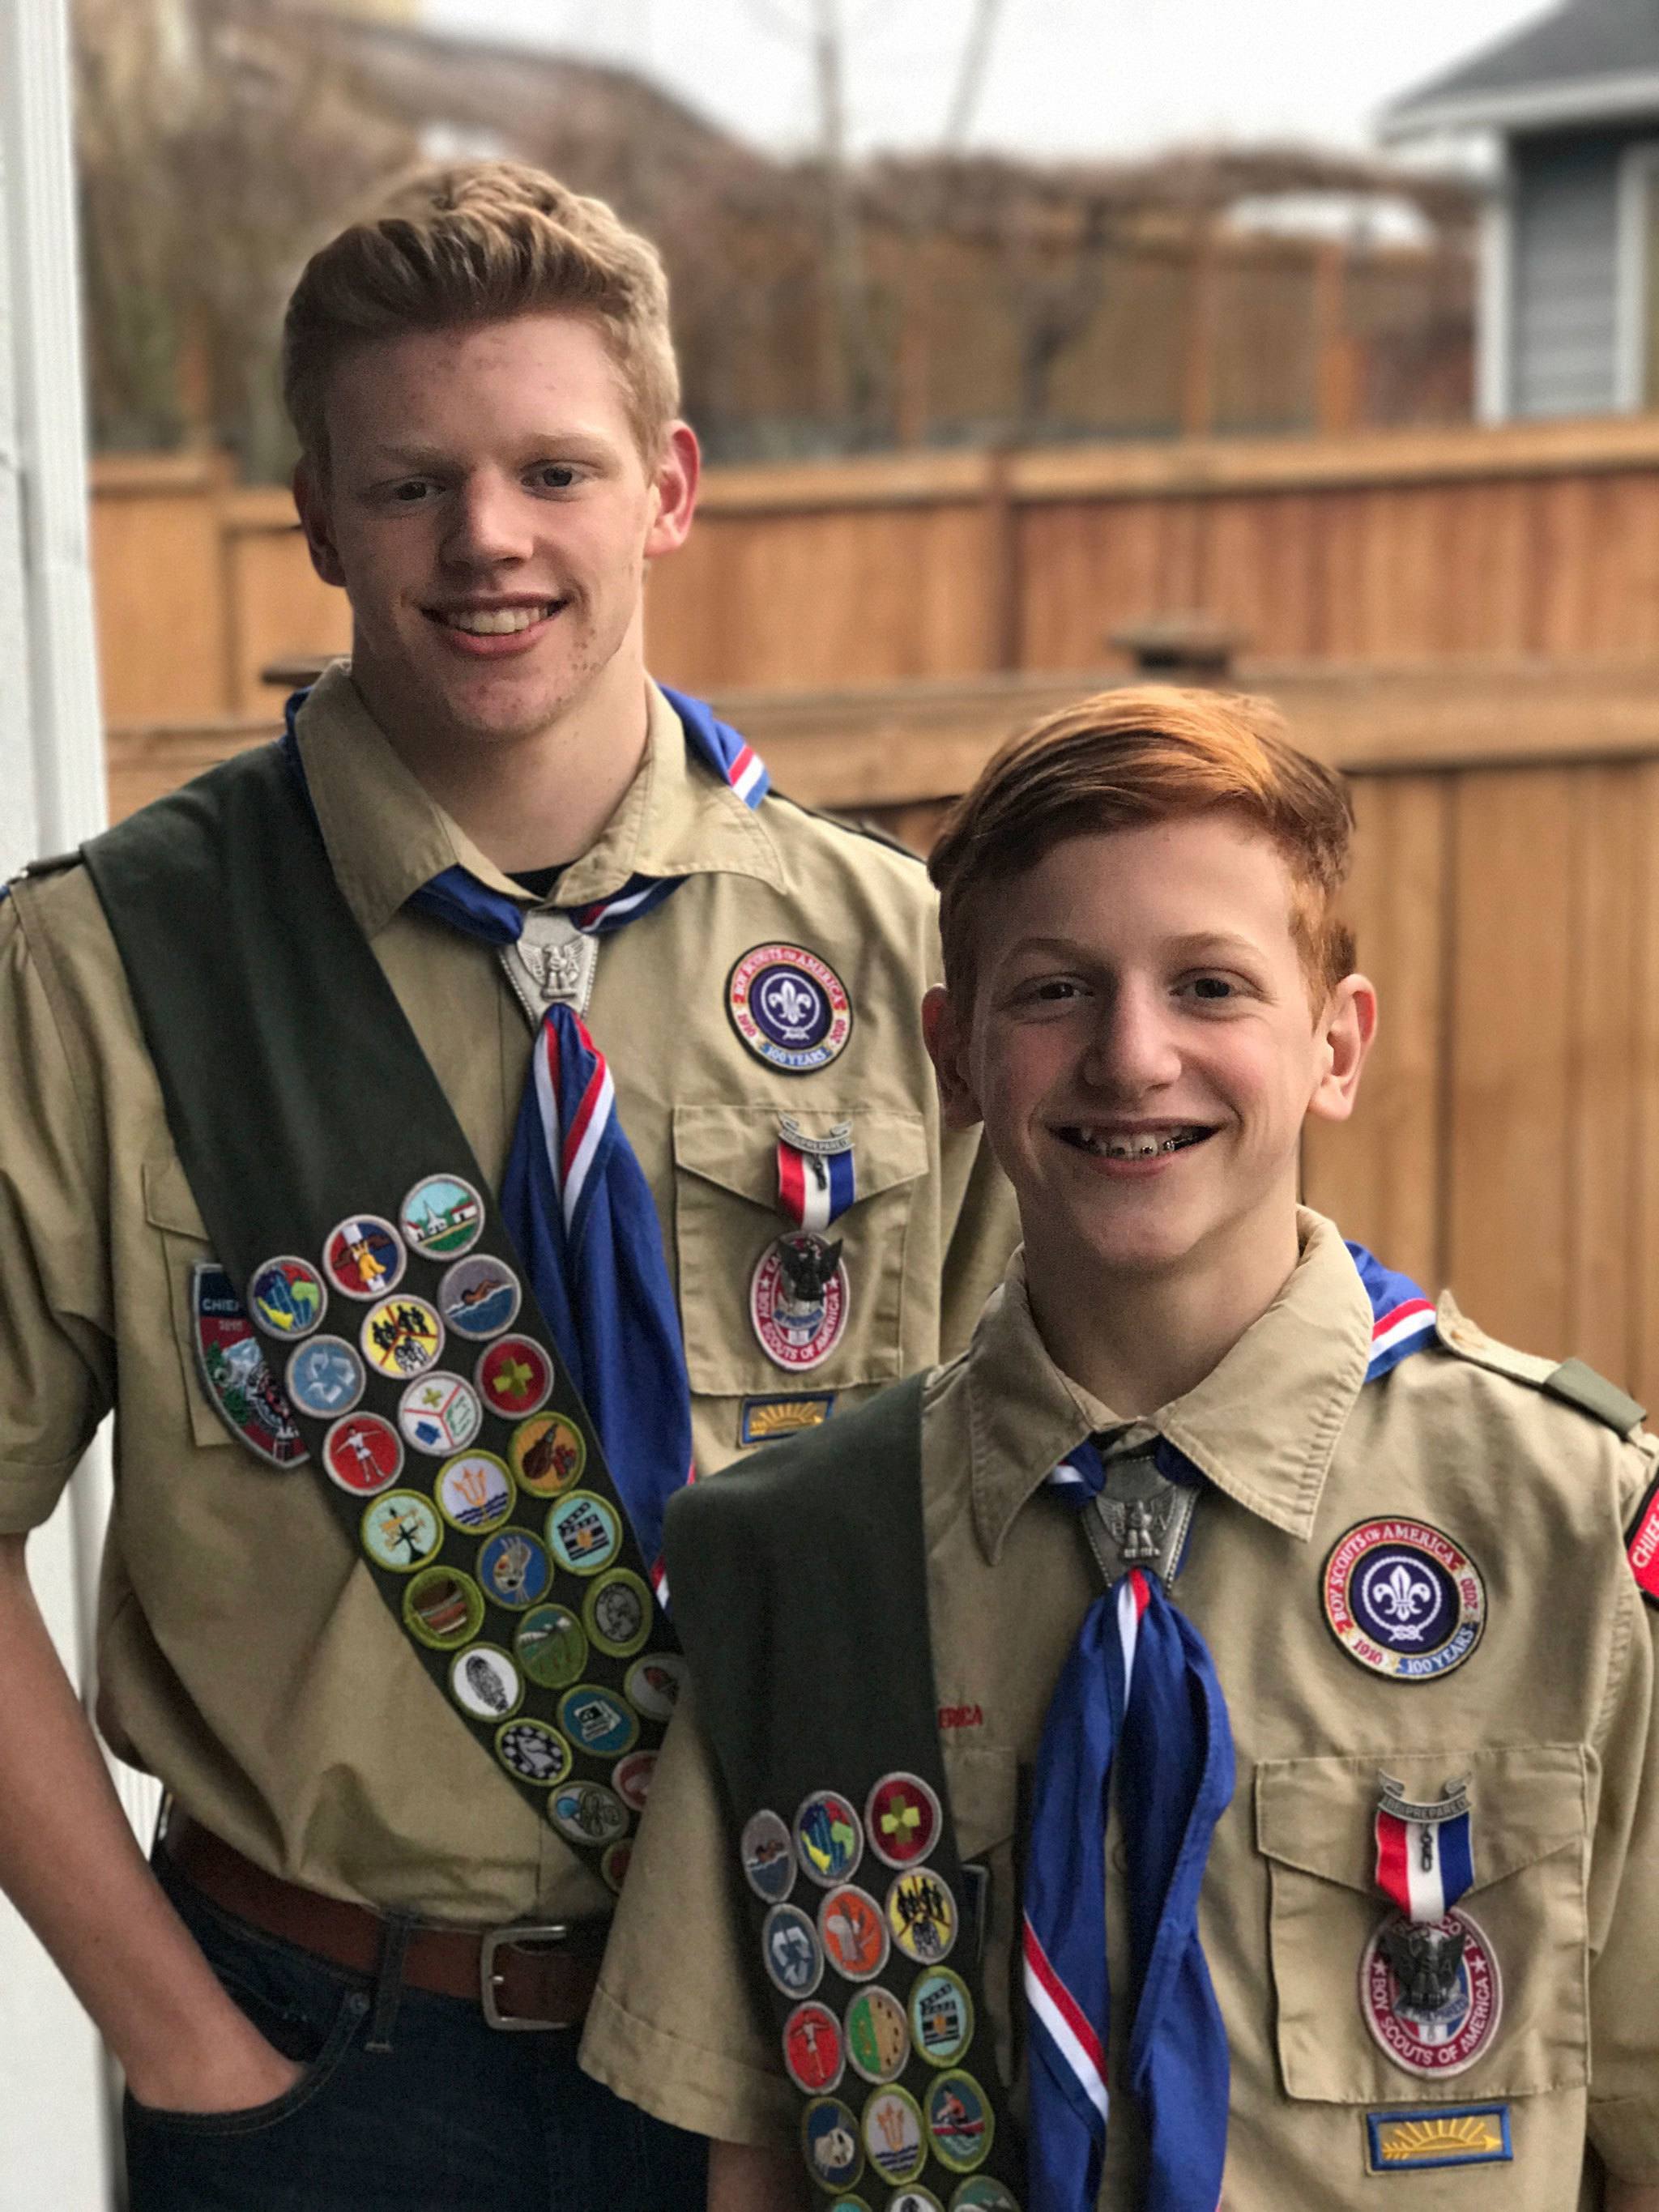 Alexander Maloy, 16, left, and his brother, Joshua, 13, are proud Eagle Scouts. COURTESY PHOTO